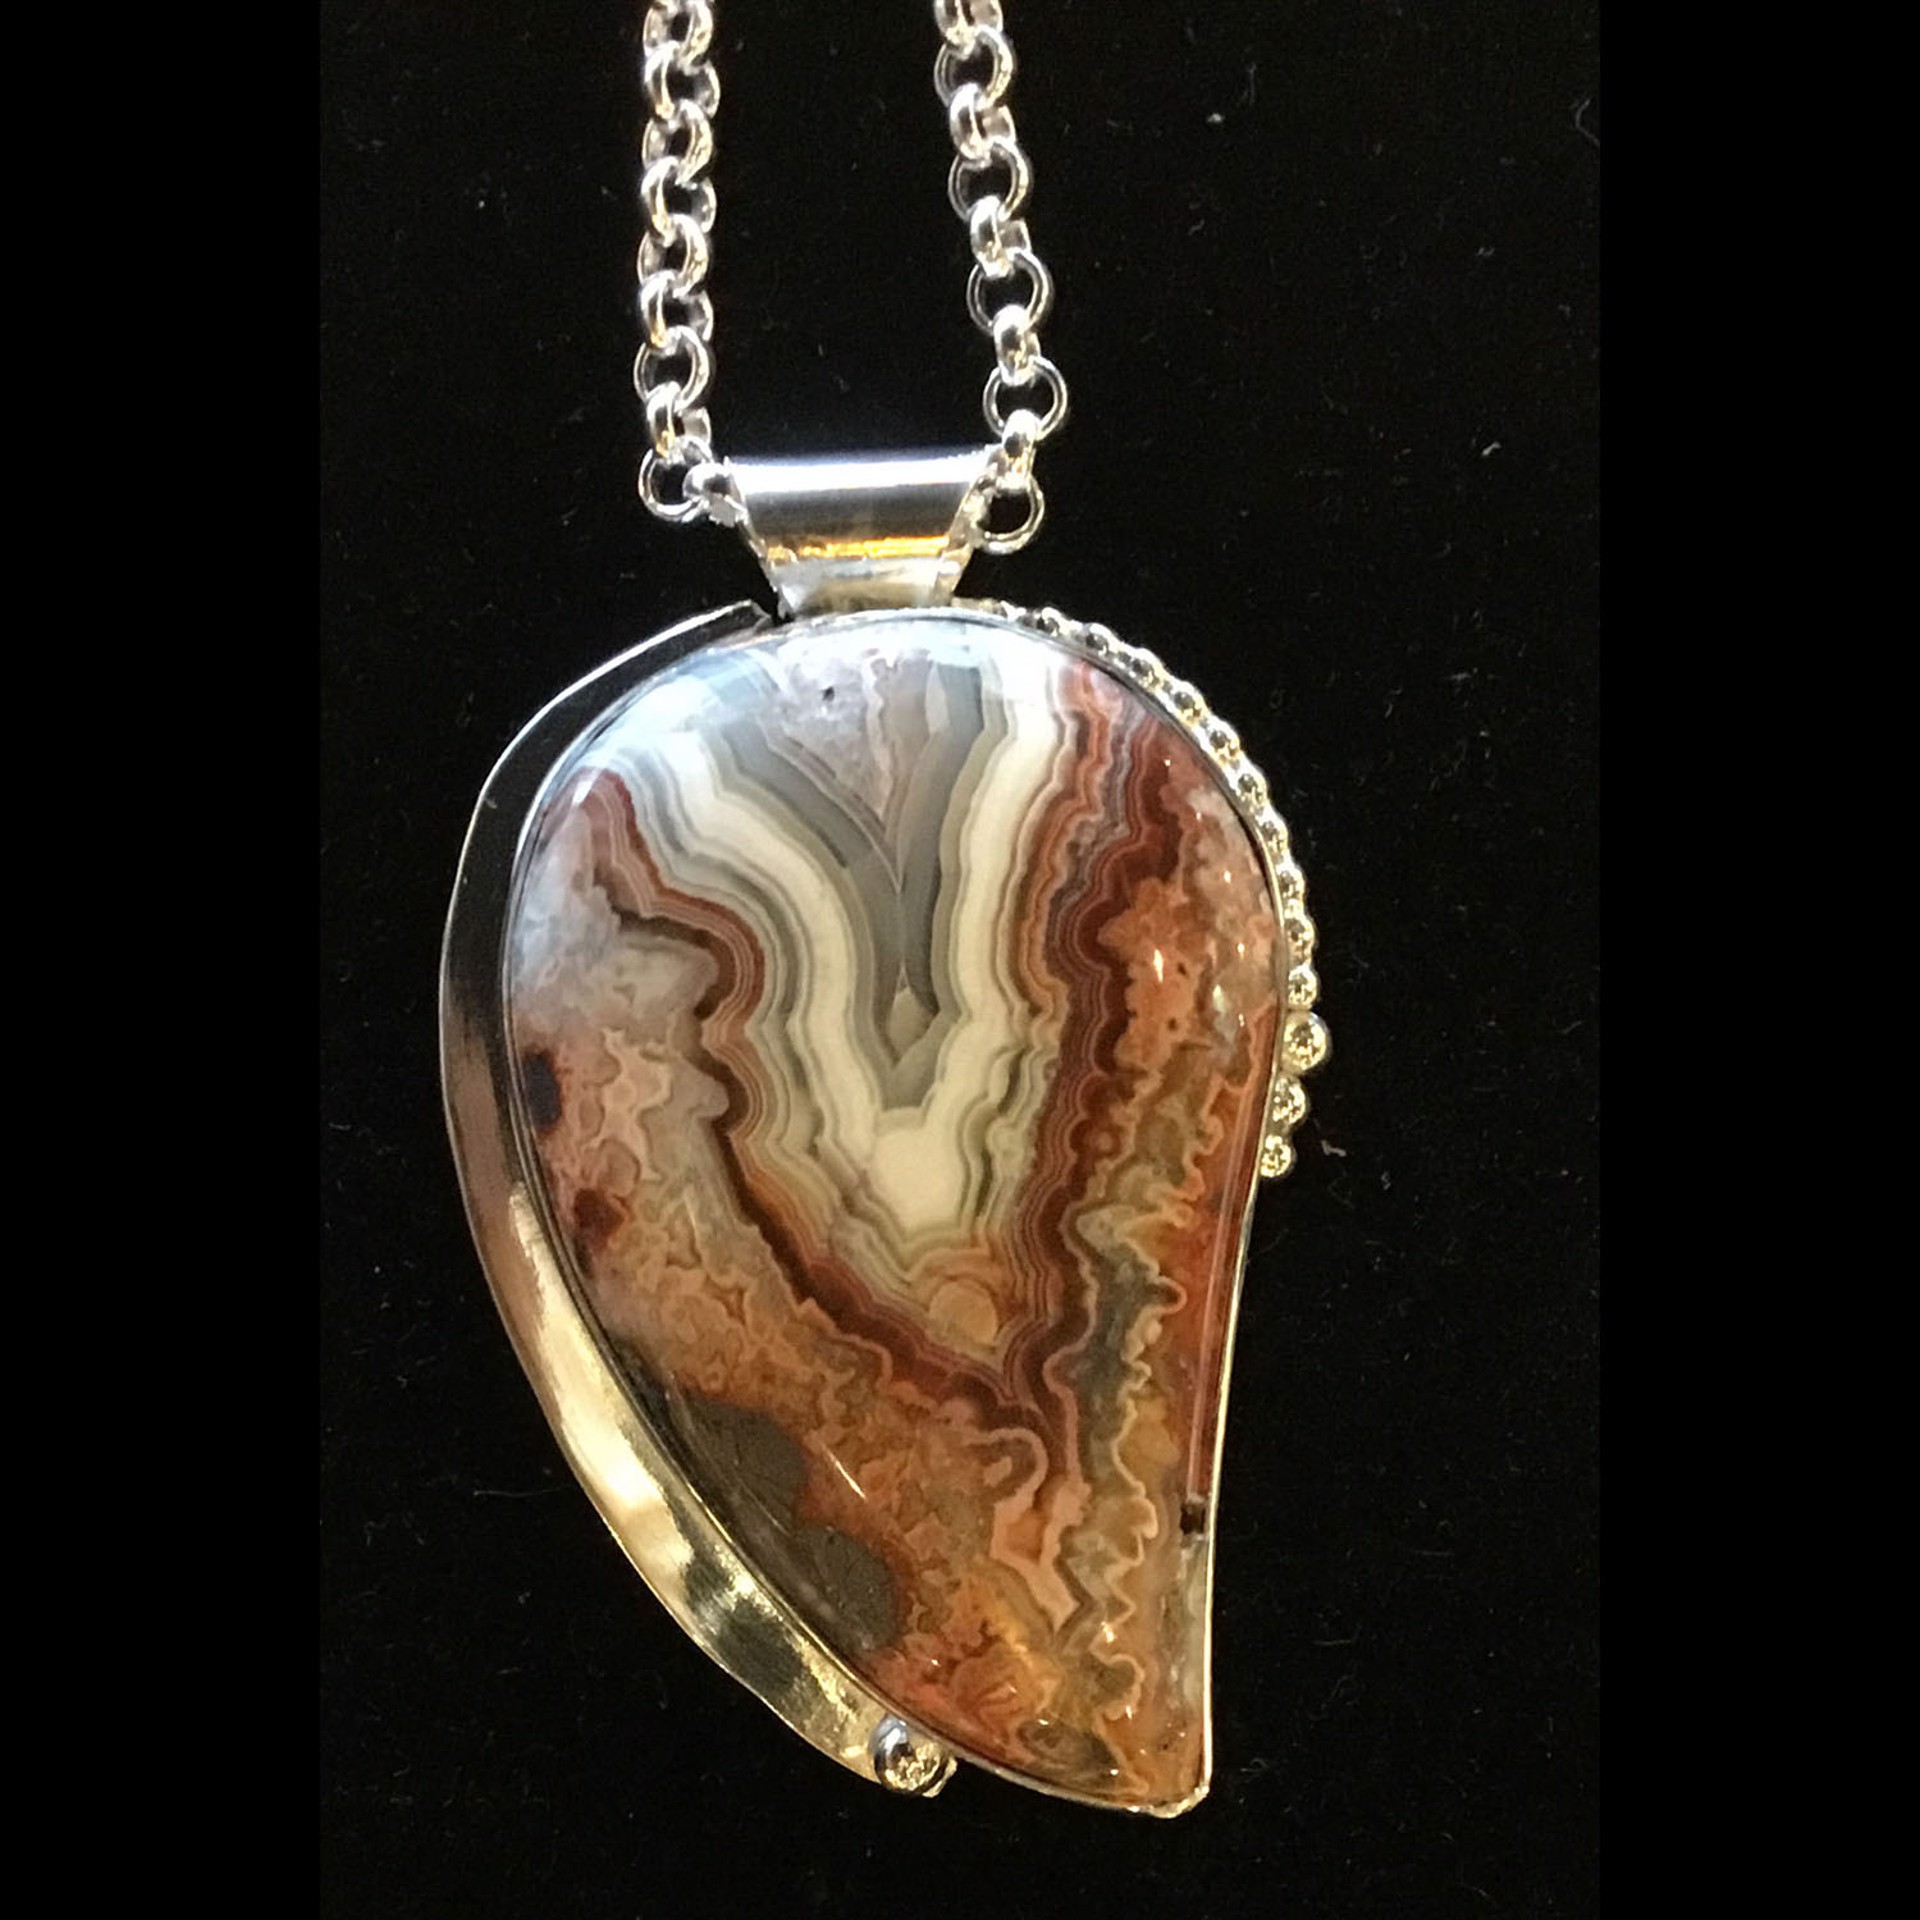 Crazy Lace Agate on 24" Chain by Michael Redhawk